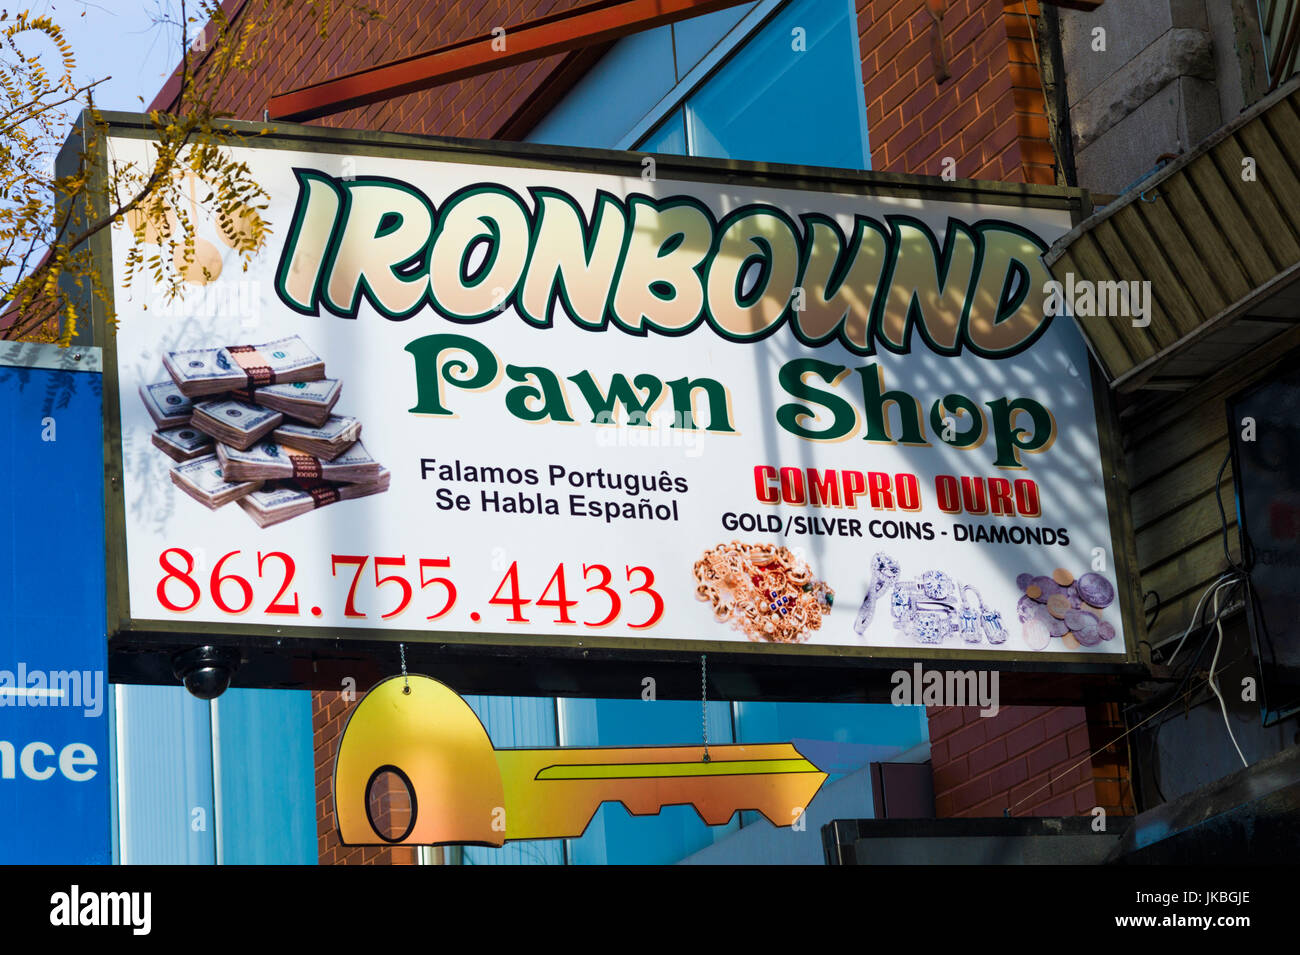 USA, New Jersey, Newark, ironbound District, Portuguese-Spanish area, pawn shop sign Stock Photo